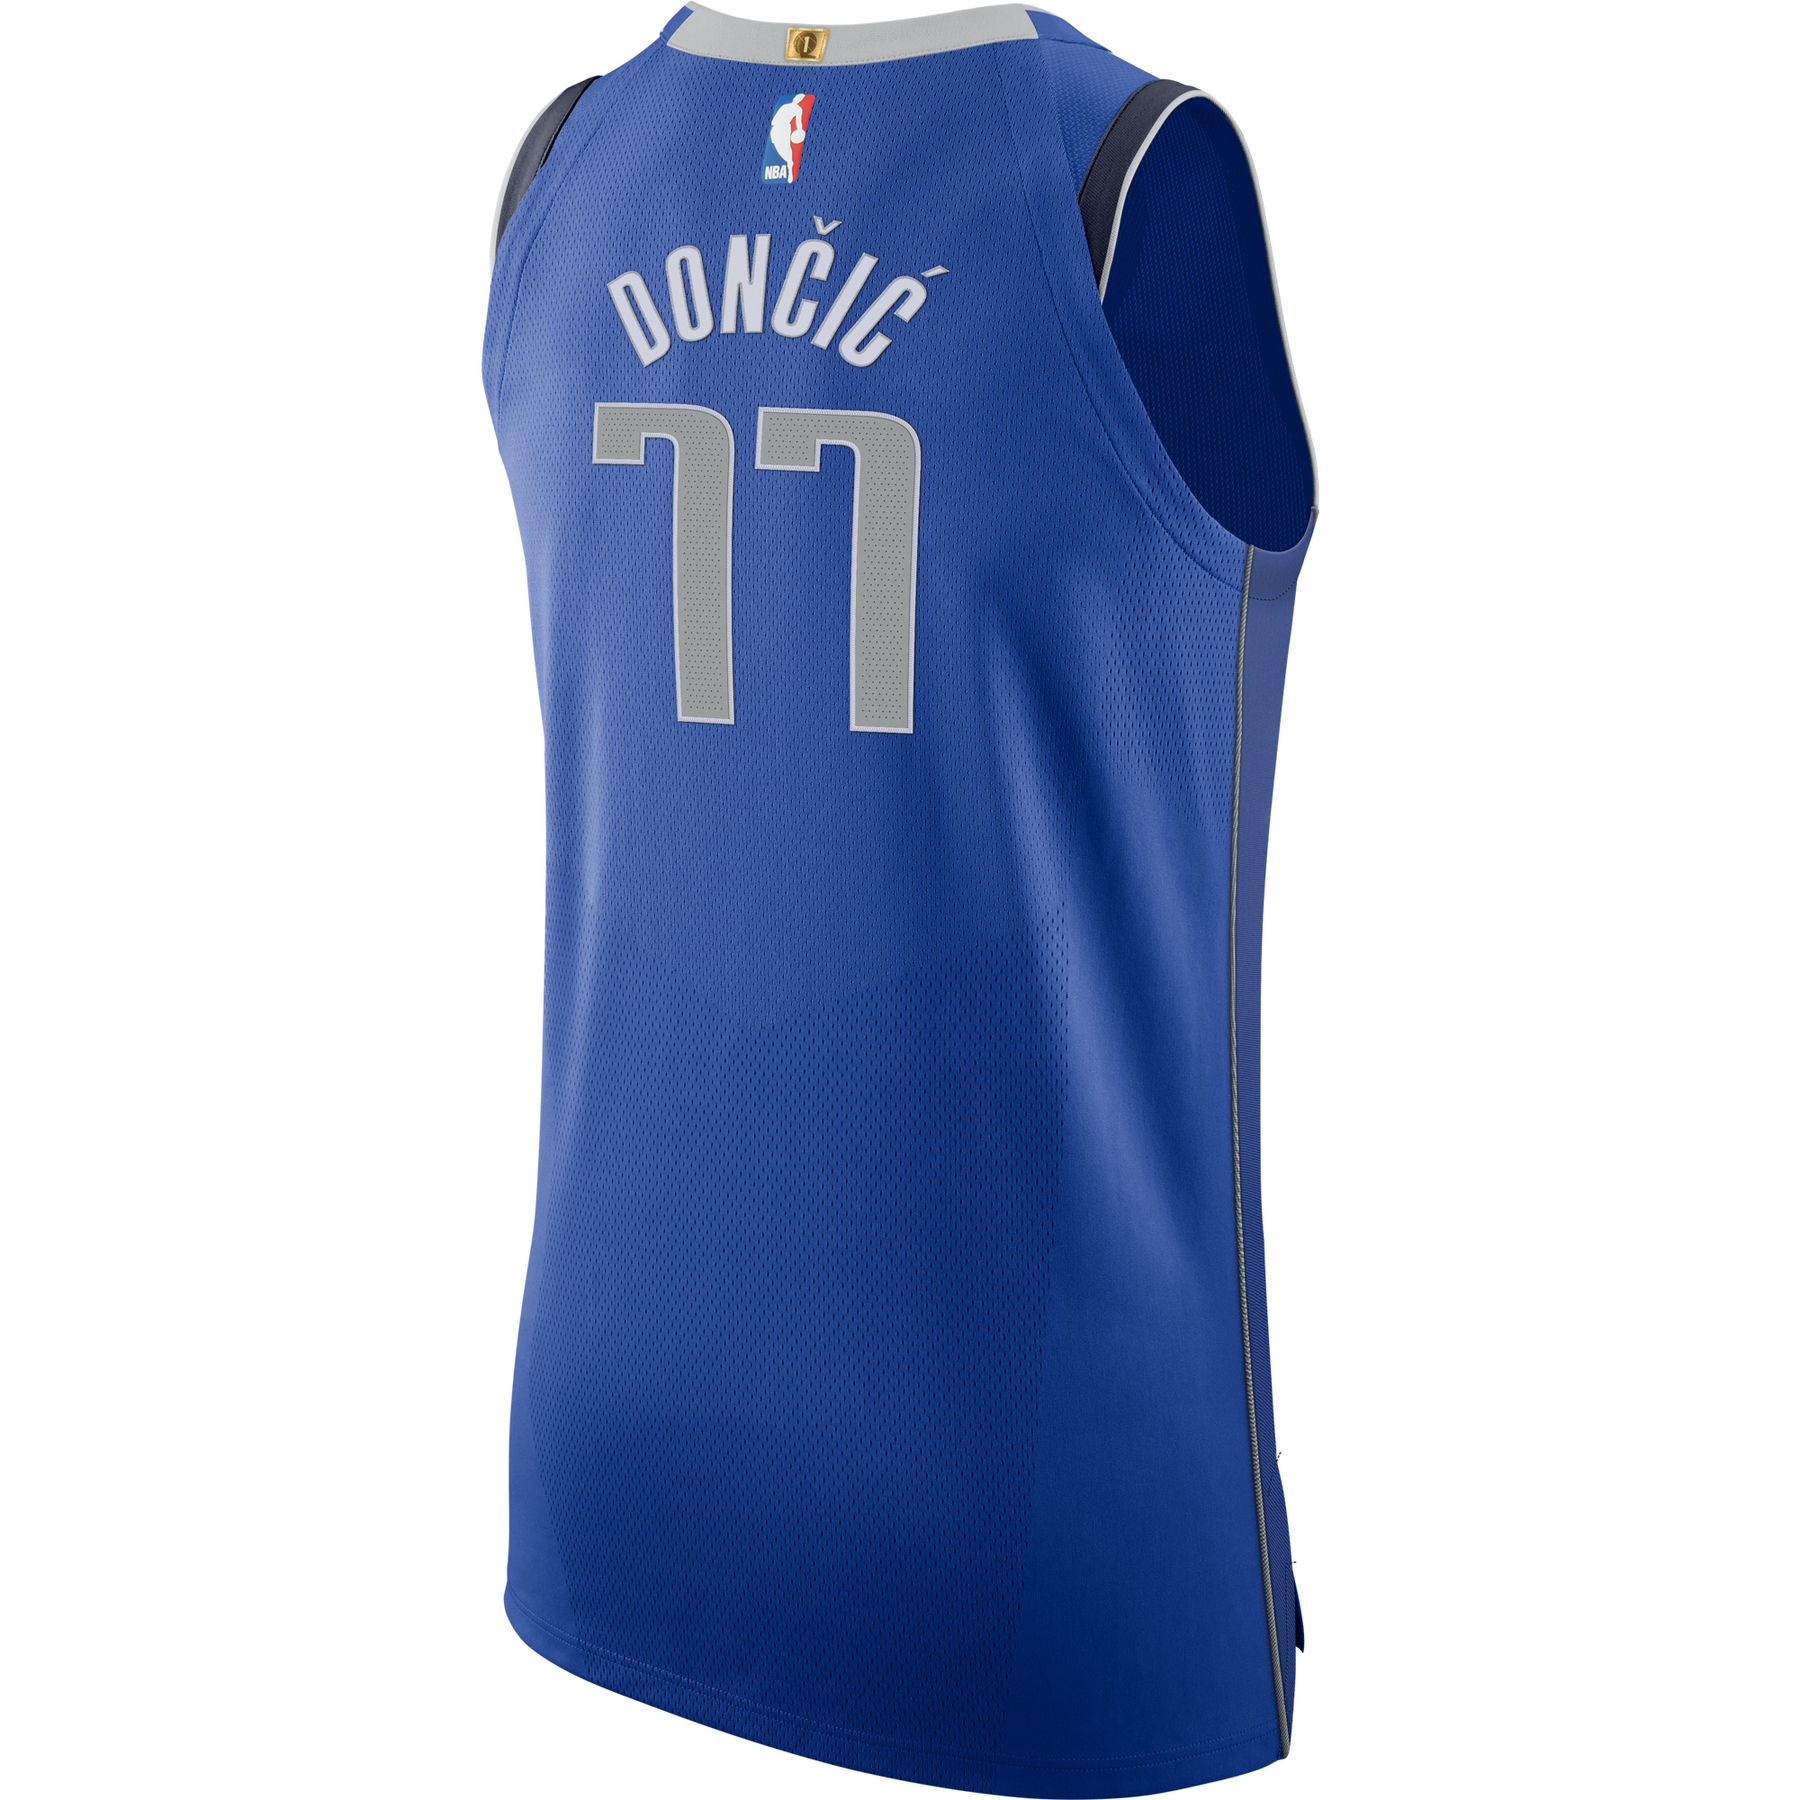 NBA Authentic Jerseys, NBA Official Authentic Uniforms and Jerseys